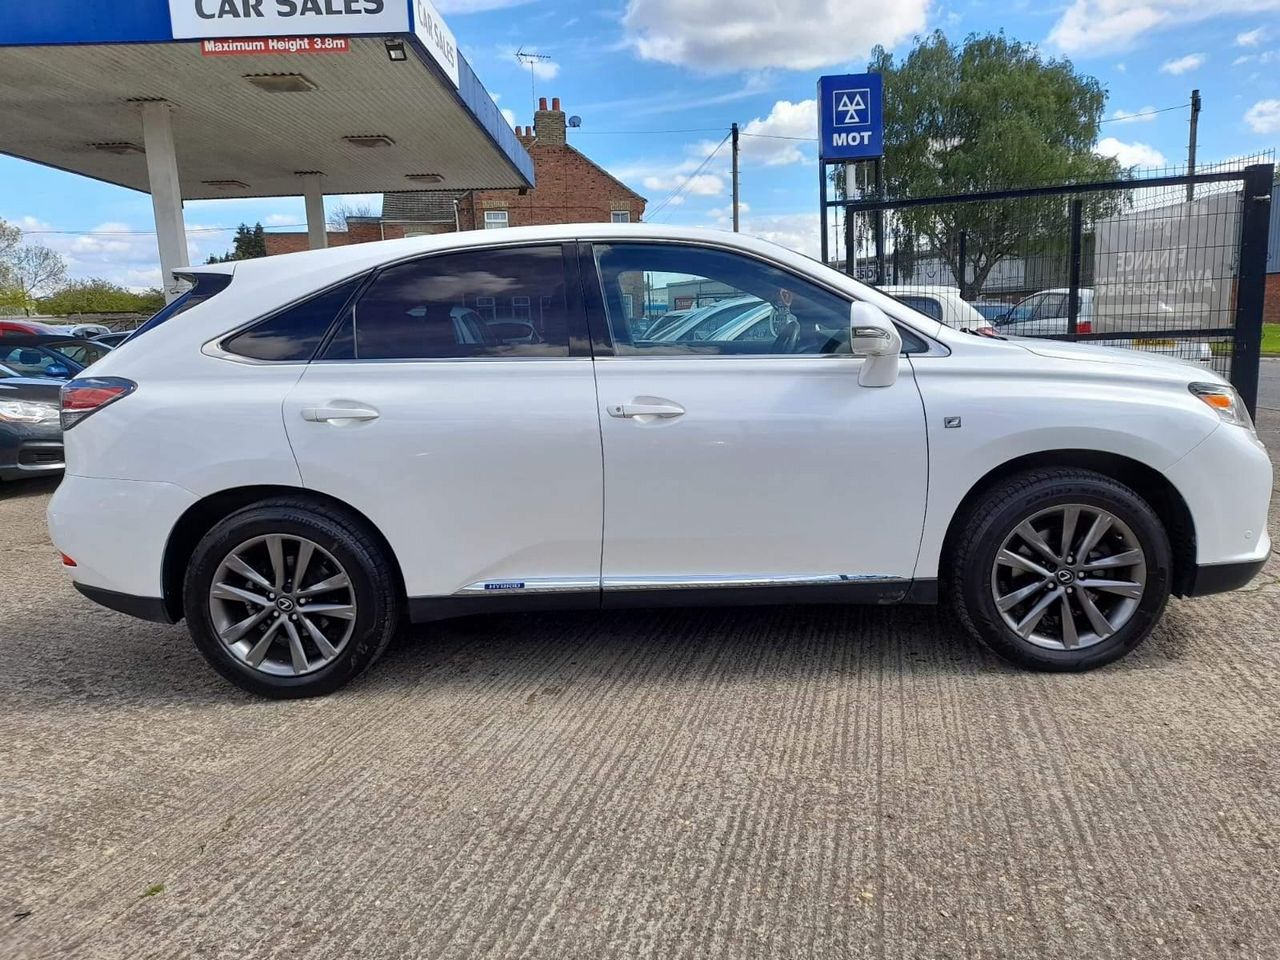 2013 Lexus RX 3.5 450h V6 F Sport SUV 5dr Petrol Hybrid CVT 4WD Euro 5 (s/s) (299 ps) - Picture 12 of 53